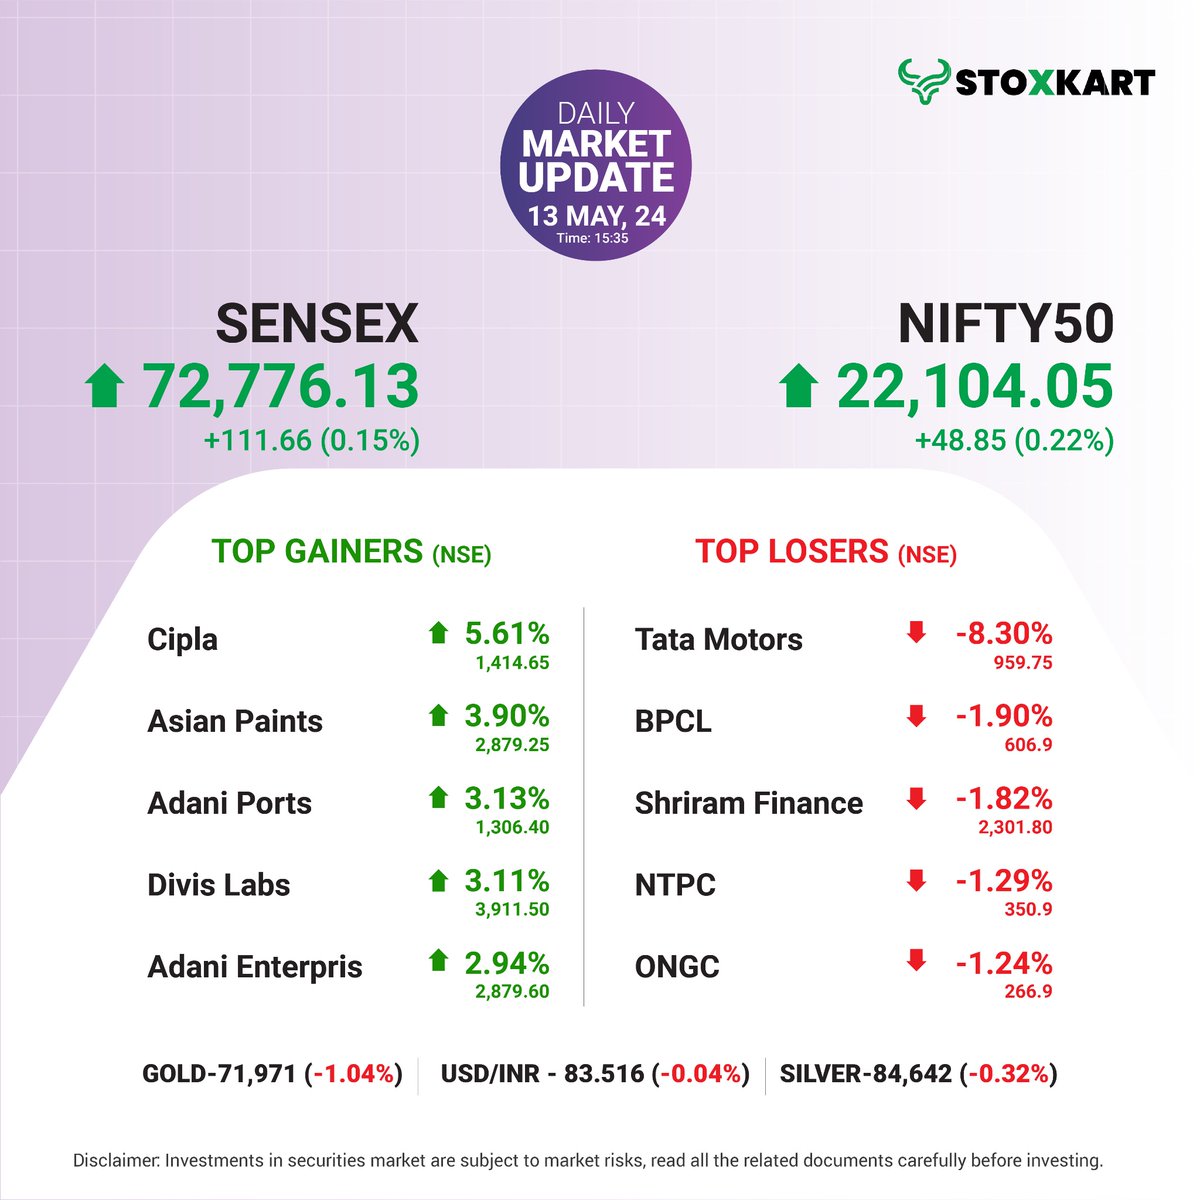 #dailymarketupdate
Here's a recap of today's market performance, focusing on the Nifty 50 index's top 5 gainers and top 5 losers. Have you invested in any of these stocks? Share your thoughts in the comments section!

#stoxkart #stoxkartapp #tradewithstoxkart #investwithstoxkart